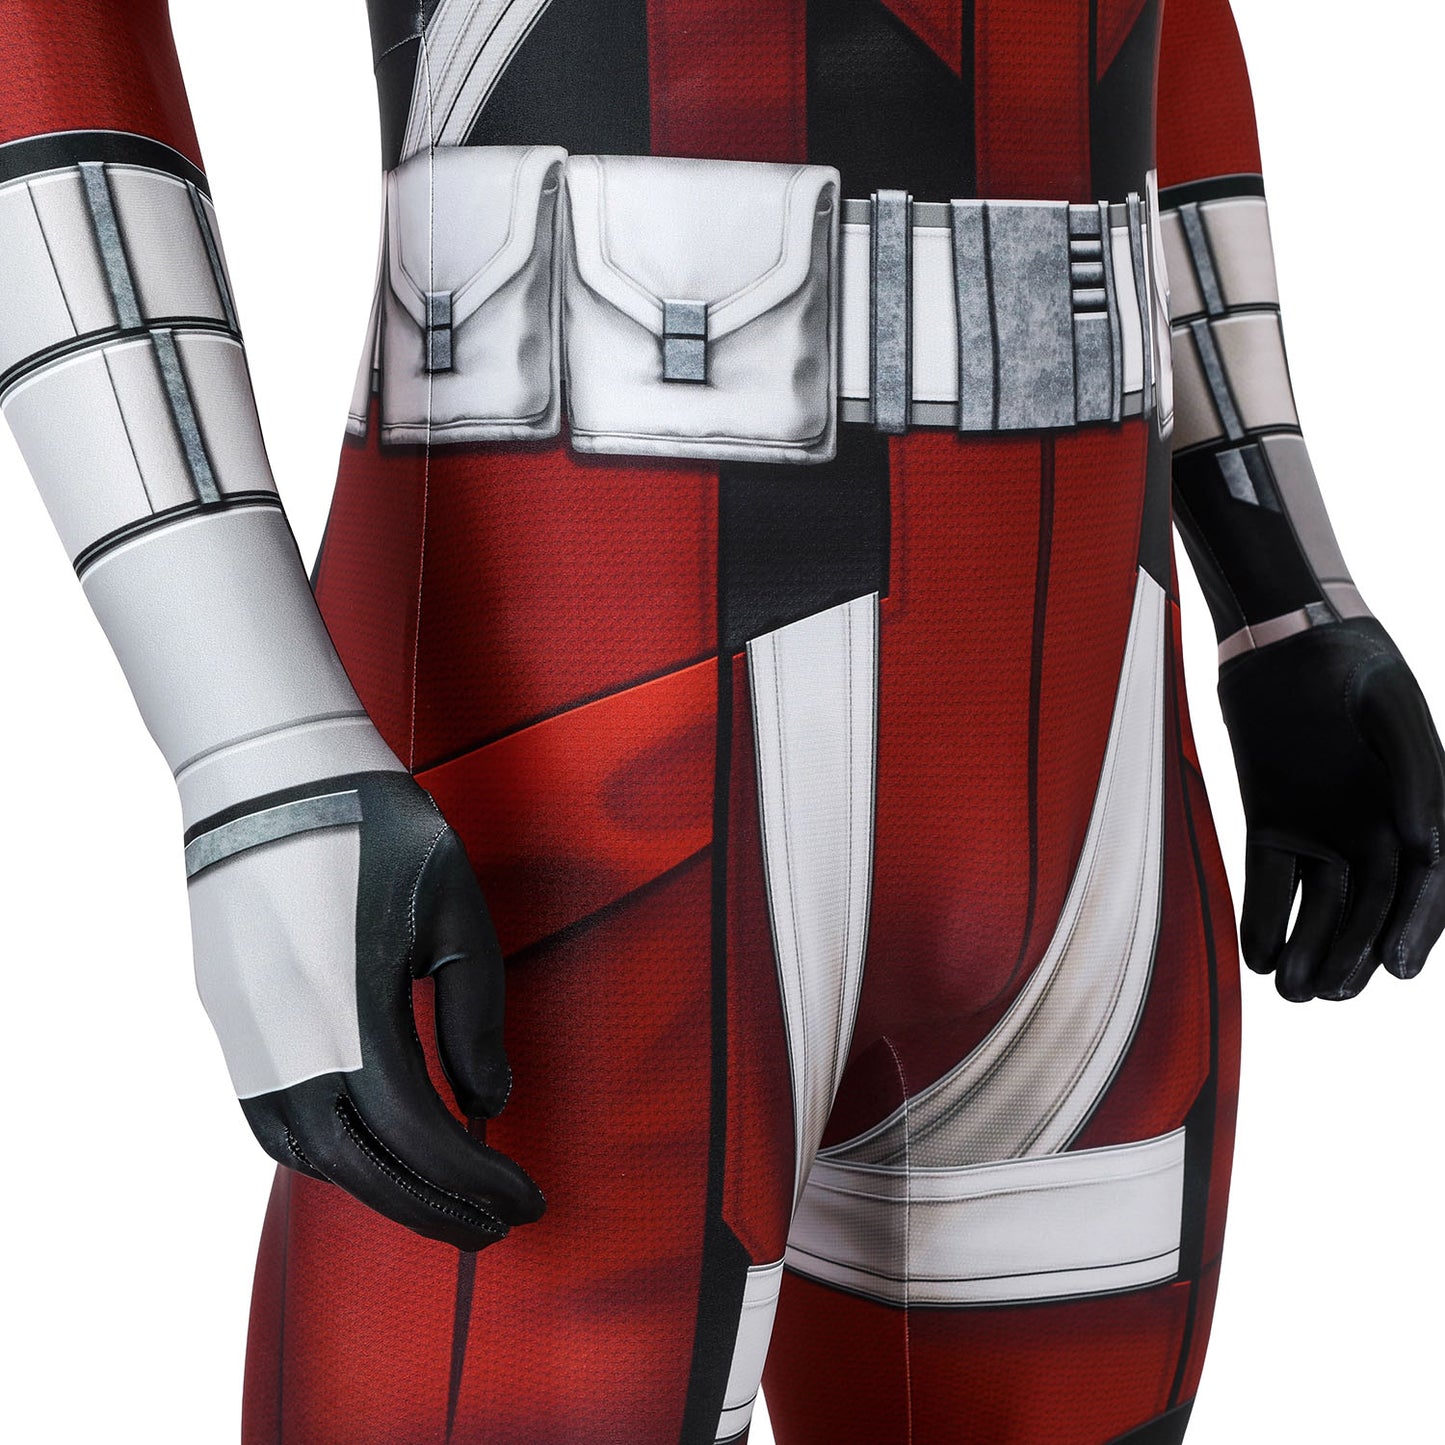 Black Widow 2020 Red Guardian Male Jumpsuit Cosplay Costumes